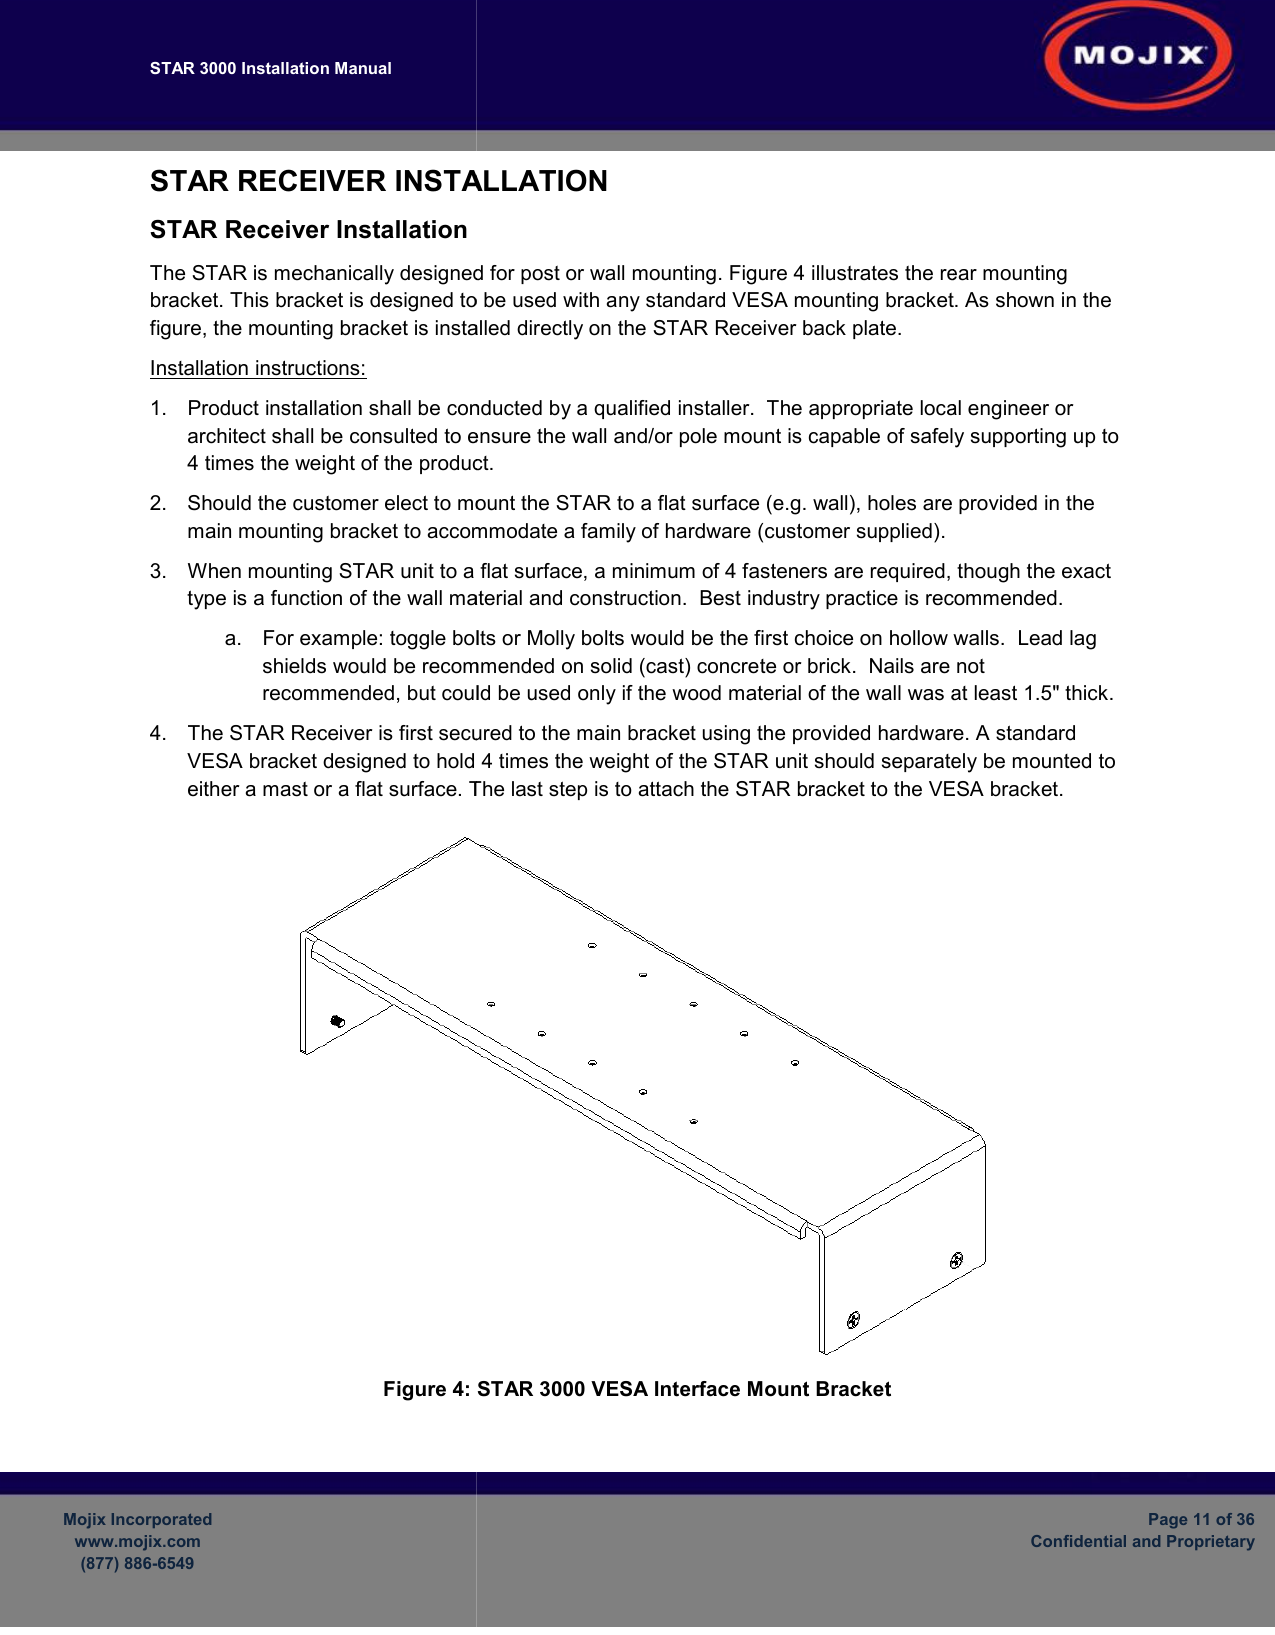 STAR 3000 Installation Manual       Mojix Incorporated www.mojix.com (877) 886-6549  STAR RECEIVER INSTALLATIONSTAR Receiver Installation The STAR is mechanically designed for post bracket. This bracket is designed to be used with any standard VESA mounting bracket. figure, the mounting bracket is installed directly on the STARInstallation instructions: 1.  Product installation shall be conducted by a qualified installer. architect shall be consulted to ensure the wall and/or pole mount is capable of safely4 times the weight of the product.2. Should the customer elect to mount the STARmain mounting bracket to accommodate a family of hardware3.  When mounting STAR unit to a flat surface, a minimum of 4 fasteners are type is a function of the wall material and construction.a.  For example: toggle bolts or Molly bolts would be the first choice on hollow walls.shields would be recommended on solid (cast) concrete or brick.recommended, but could be used only if the wood material of the wall was at 4.  The STAR Receiver is first secured to the main bracket using the VESA bracket designed to hold 4 times the weight of the STAR unit should separately be mounted to either a mast or a flat surface. The last step is to attach the STAR bracket to the VESA bracket.Figure 4:     INSTALLATION  is mechanically designed for post or wall mounting. Figure 4 illustrates the rear mounting bracket. This bracket is designed to be used with any standard VESA mounting bracket. bracket is installed directly on the STAR Receiver back plate.  shall be conducted by a qualified installer.  The appropriate local engineer or architect shall be consulted to ensure the wall and/or pole mount is capable of safely4 times the weight of the product. Should the customer elect to mount the STAR to a flat surface (e.g. wall), holes are provided in the bracket to accommodate a family of hardware (customer supplied).  unit to a flat surface, a minimum of 4 fasteners are required, though the exact type is a function of the wall material and construction.  Best industry practice is recommended.: toggle bolts or Molly bolts would be the first choice on hollow walls.shields would be recommended on solid (cast) concrete or brick.  Nails are not recommended, but could be used only if the wood material of the wall was at secured to the main bracket using the provided hardware.VESA bracket designed to hold 4 times the weight of the STAR unit should separately be mounted to or a flat surface. The last step is to attach the STAR bracket to the VESA bracket. STAR 3000 VESA Interface Mount Bracket Page 11 of 36 Confidential and Proprietary rear mounting bracket. This bracket is designed to be used with any standard VESA mounting bracket. As shown in the The appropriate local engineer or architect shall be consulted to ensure the wall and/or pole mount is capable of safely supporting up to to a flat surface (e.g. wall), holes are provided in the   , though the exact Best industry practice is recommended.   : toggle bolts or Molly bolts would be the first choice on hollow walls.  Lead lag Nails are not recommended, but could be used only if the wood material of the wall was at least 1.5&quot; thick. provided hardware. A standard VESA bracket designed to hold 4 times the weight of the STAR unit should separately be mounted to or a flat surface. The last step is to attach the STAR bracket to the VESA bracket.  